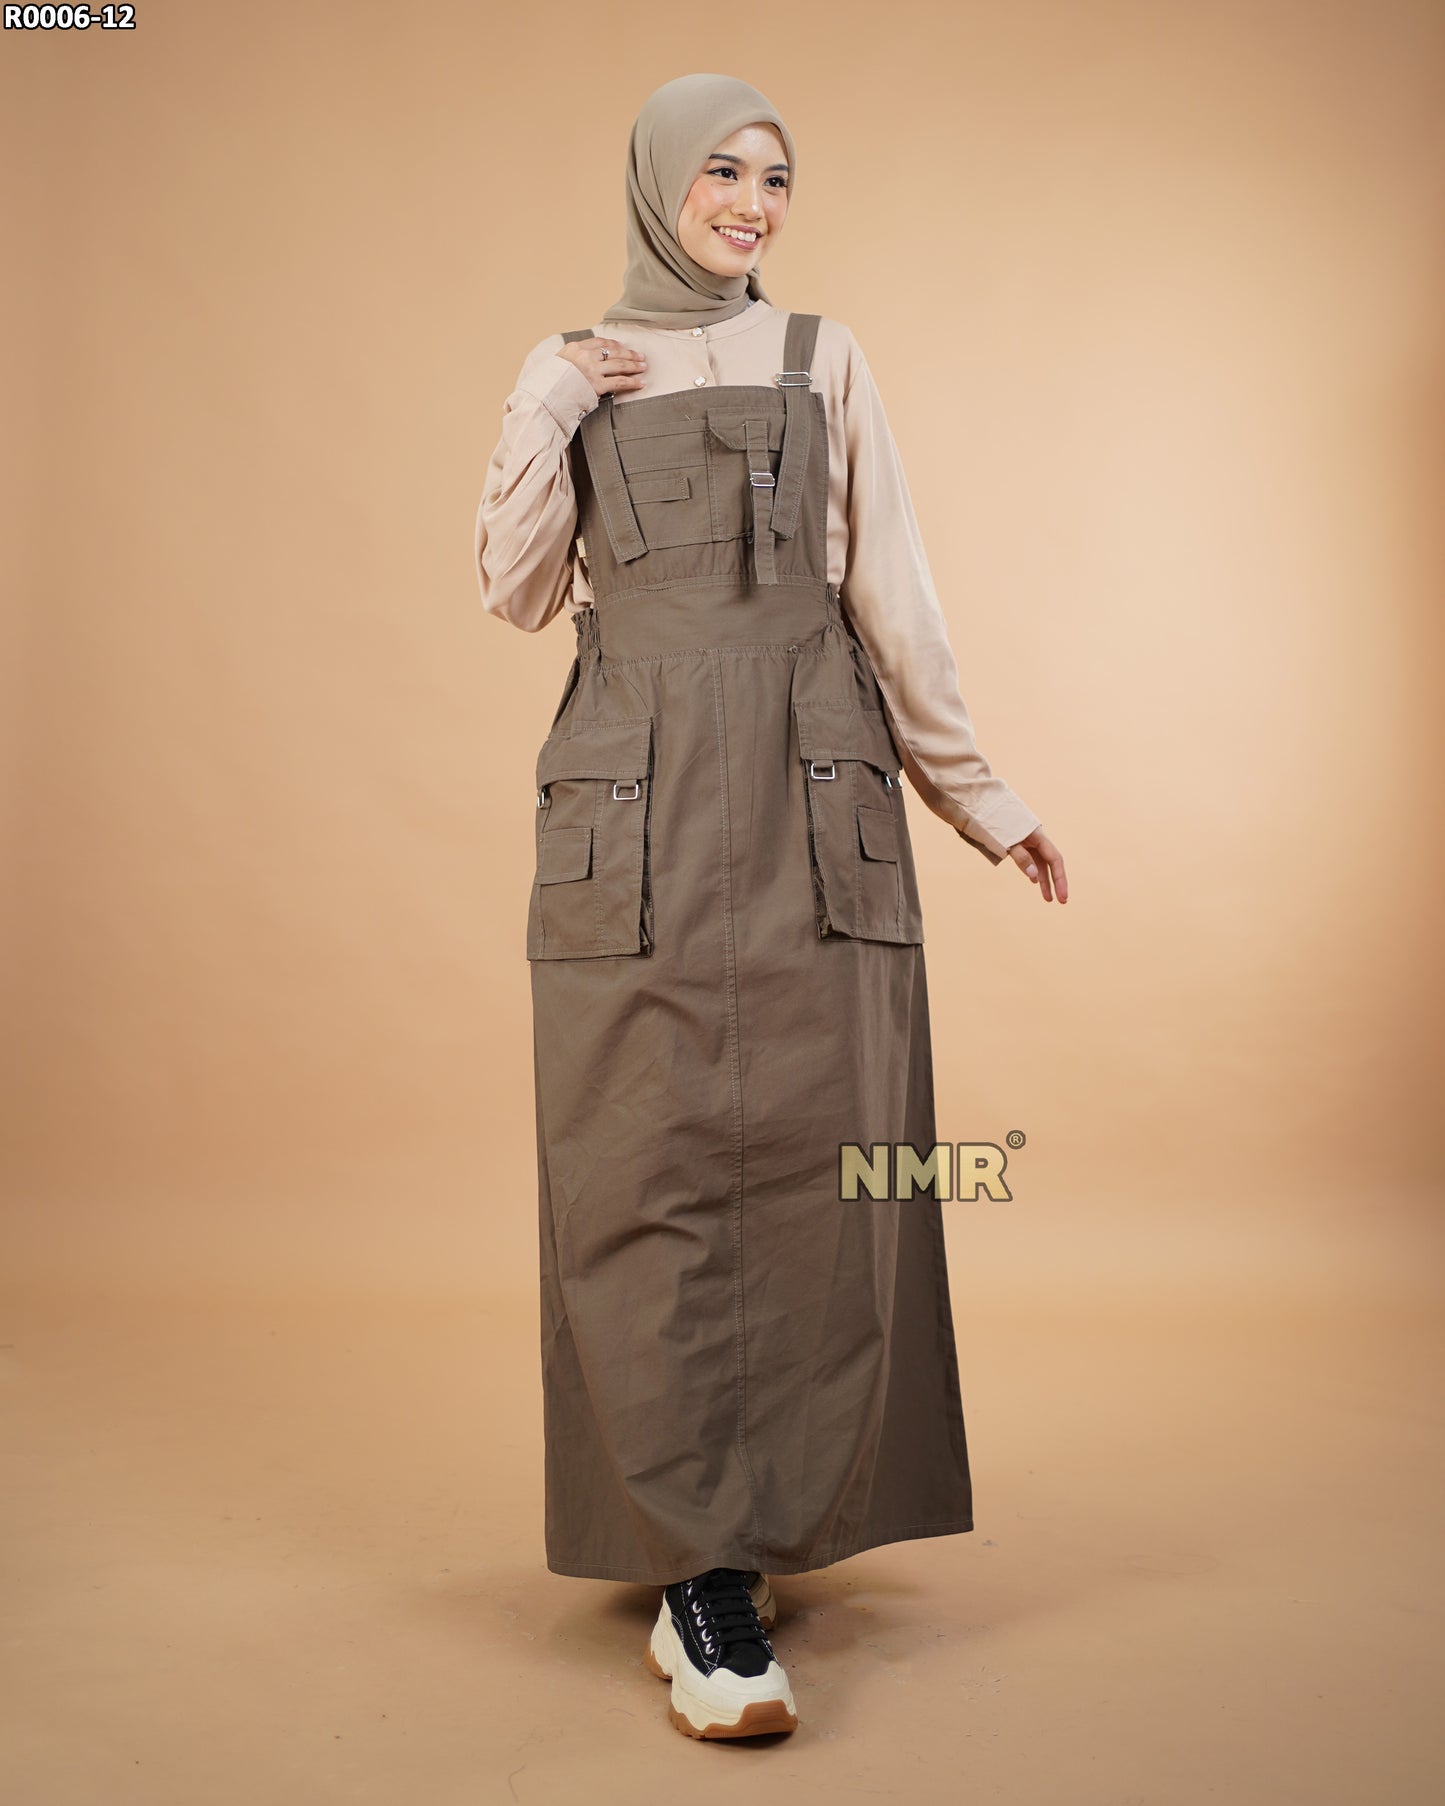 NMR Gamis Jumpsuit Overall Baby Canvas Vol R0006-12